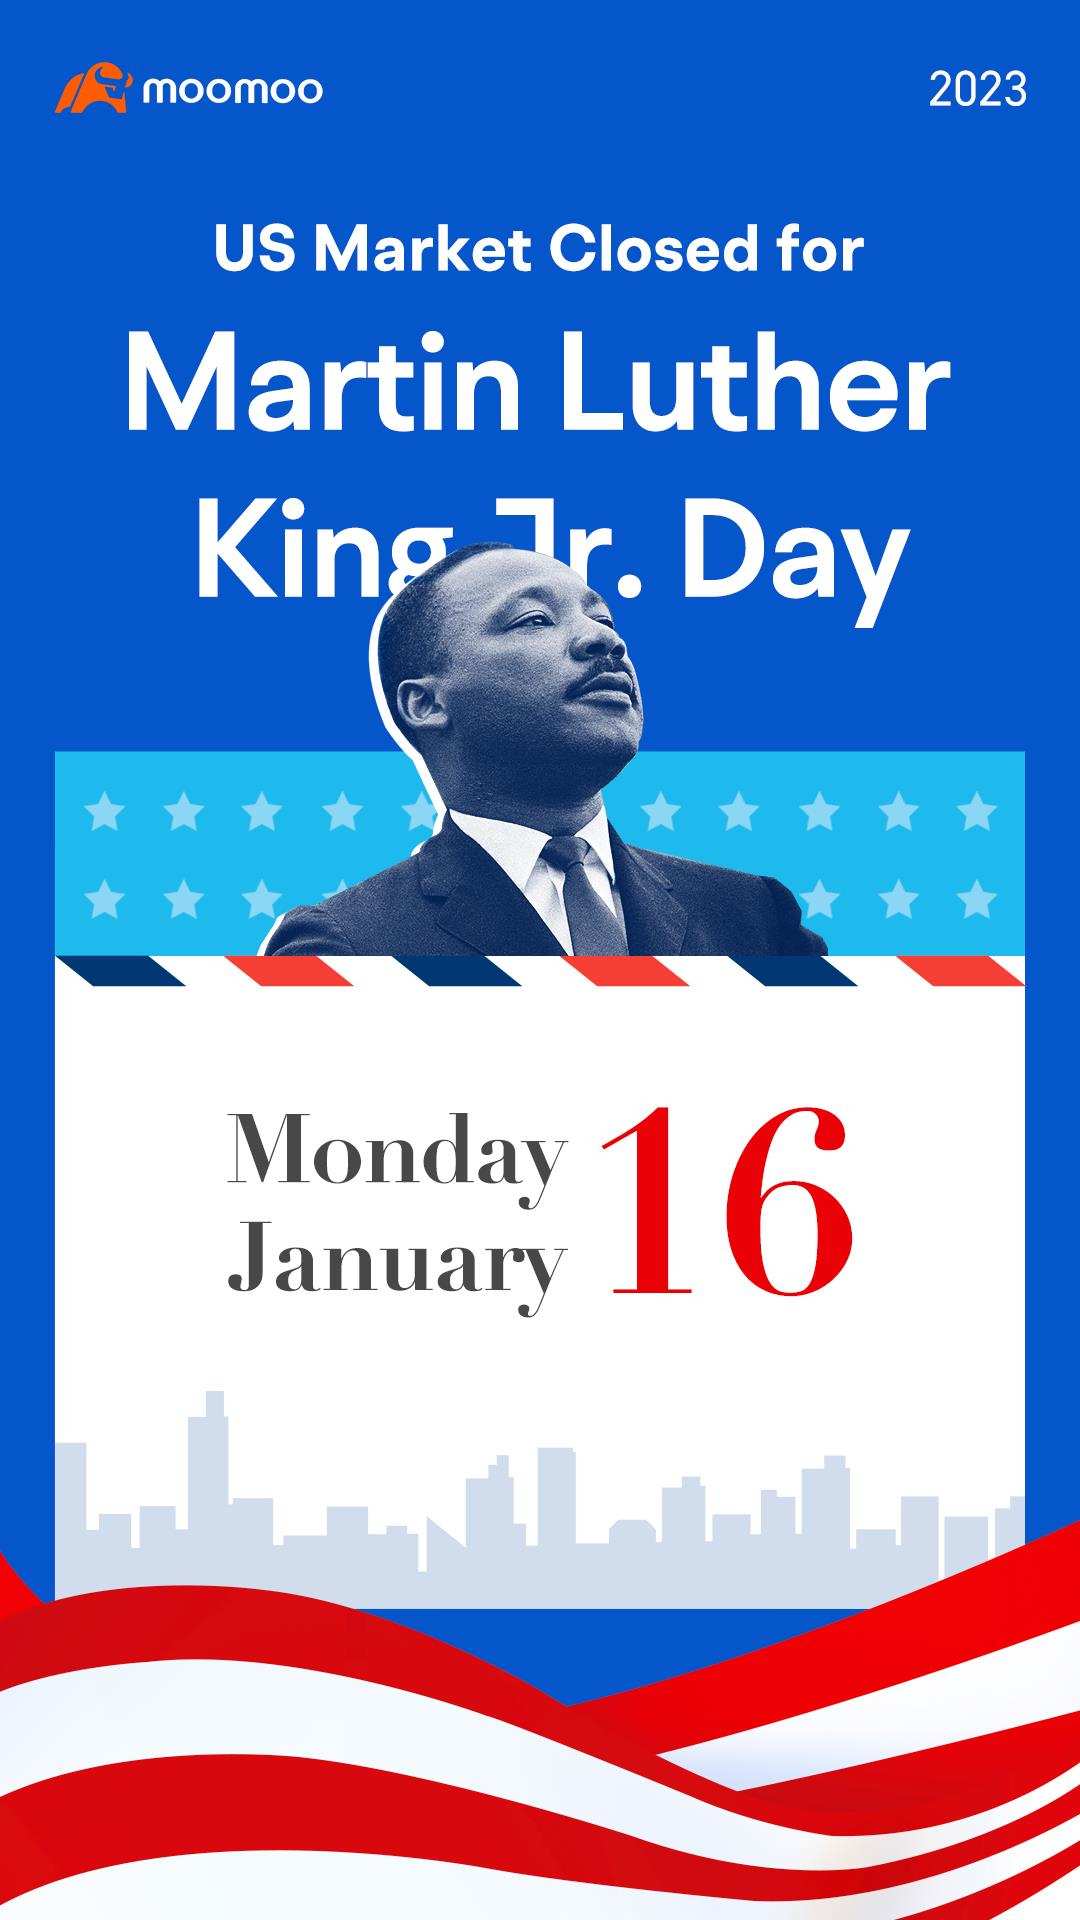 US Markets Closure Notice for the Martin Luther King Jr. Day